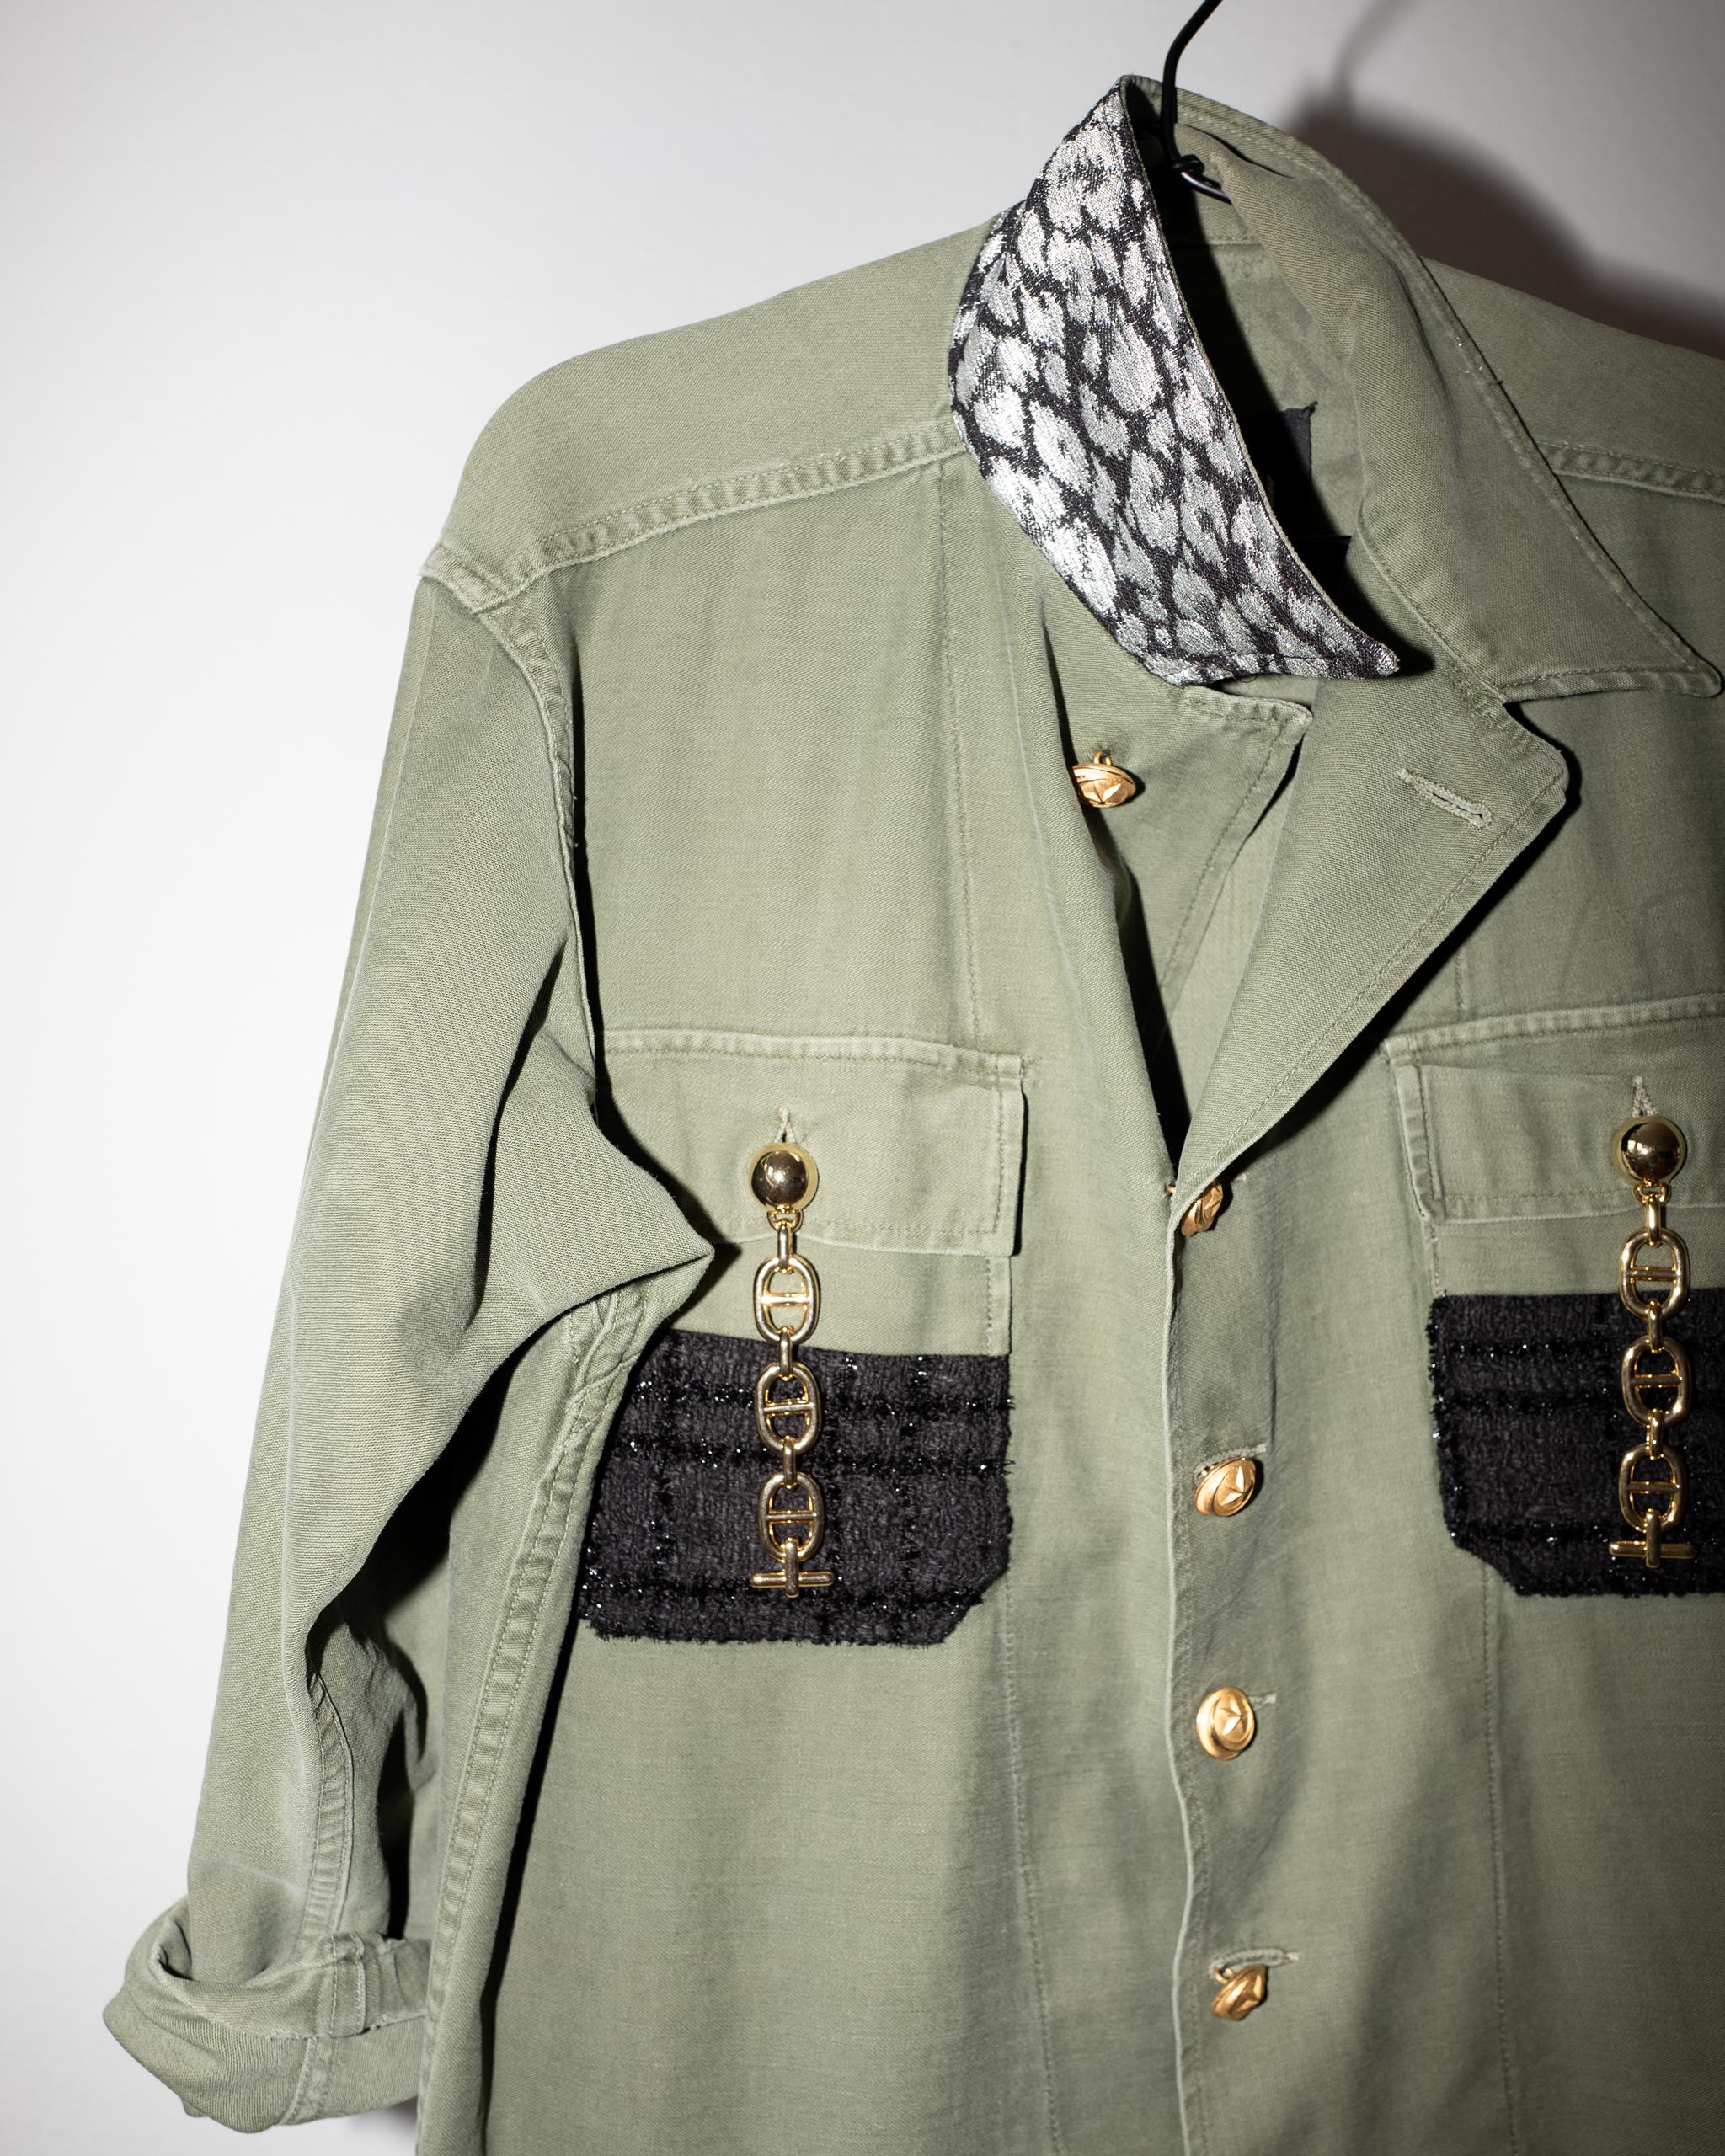 Vintage one of a kind distressed Green Military Jacket with Vintage Silver Lurex Animal Jaquard Collar, Black Tweed Pockets, Vintage Italian Gold Chain Details on Pockets
Designer : J DAUPHIN
Taille : Large
Luxe durable, Vintage recyclé et